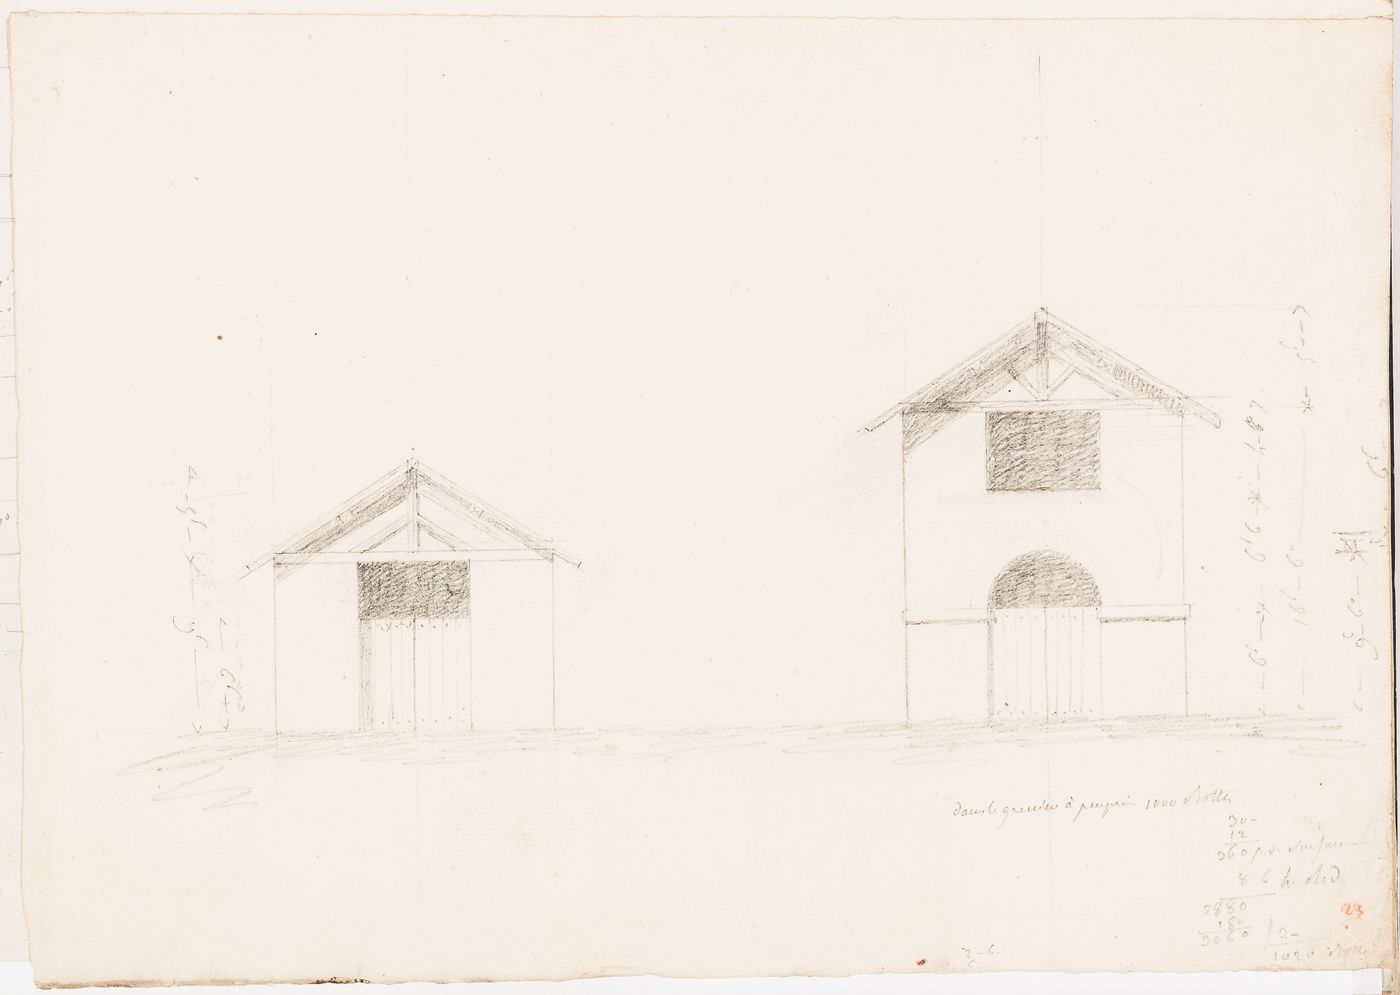 Elevation, probably for an outbuilding, Domaine de La Vallée; verso: Sketch plan for an unidentified building